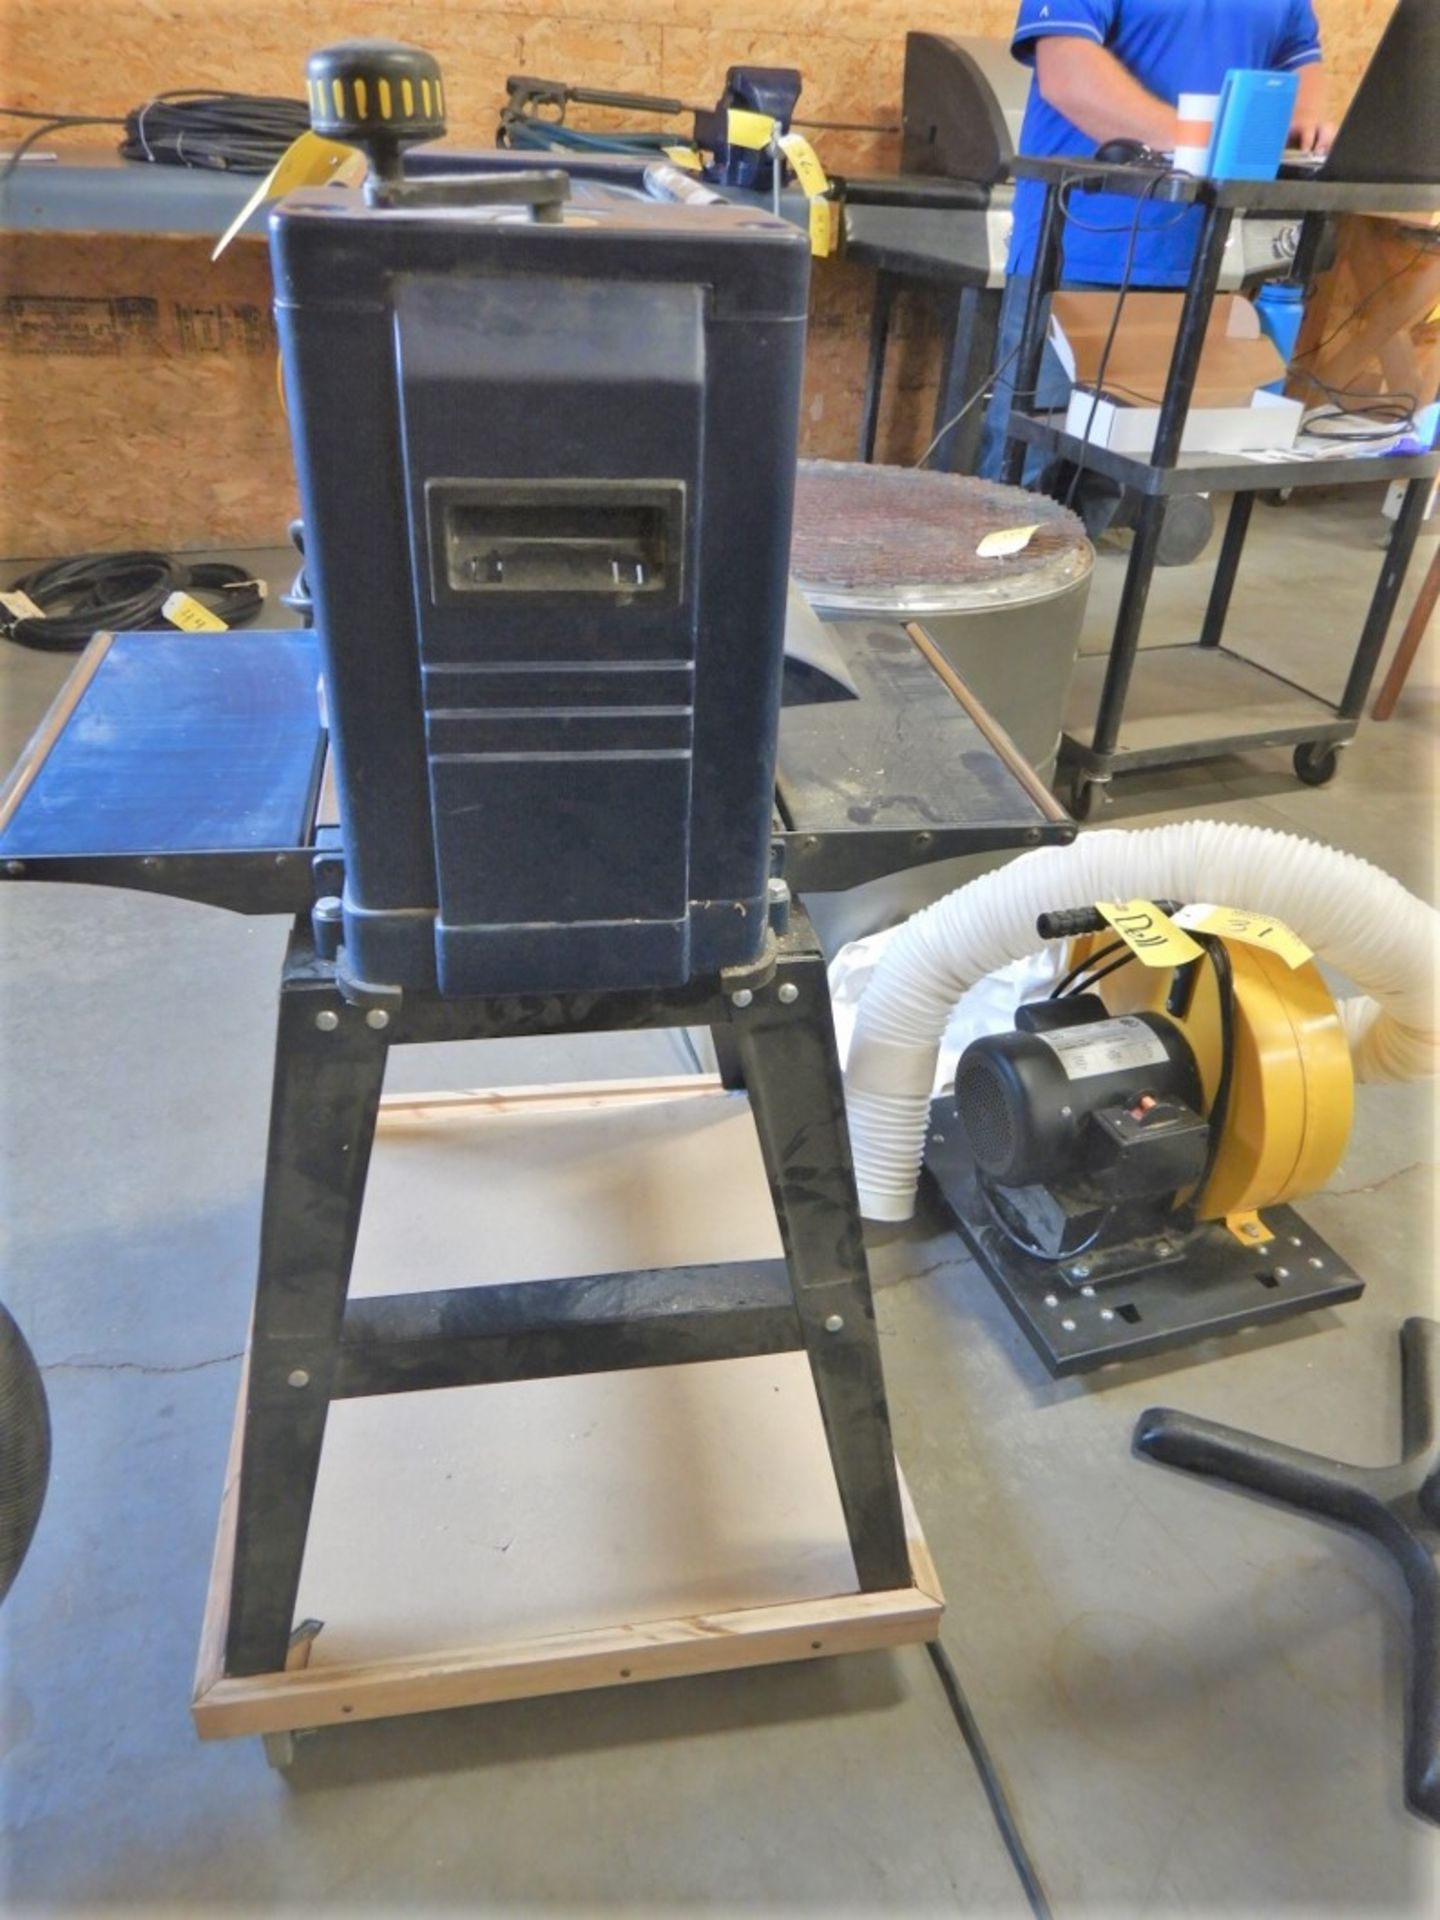 MASTERCRAFT 12.5IN THICKNESS PLANER ON STAND - Image 3 of 6